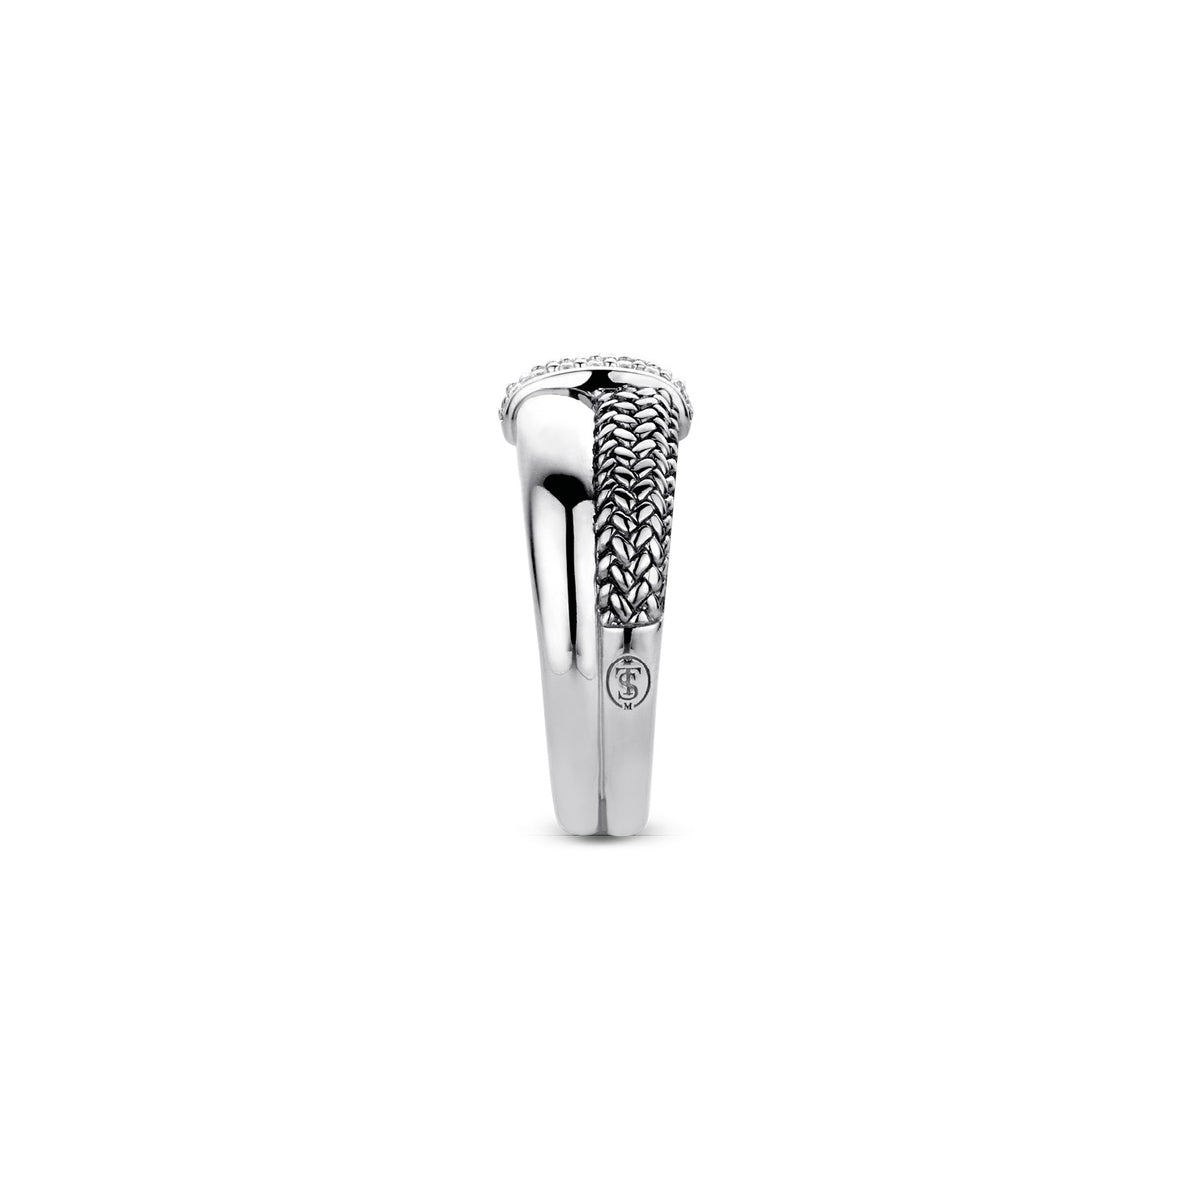 TI SENTO Sterling Silver Weave Band with Cubic Zirconia Center